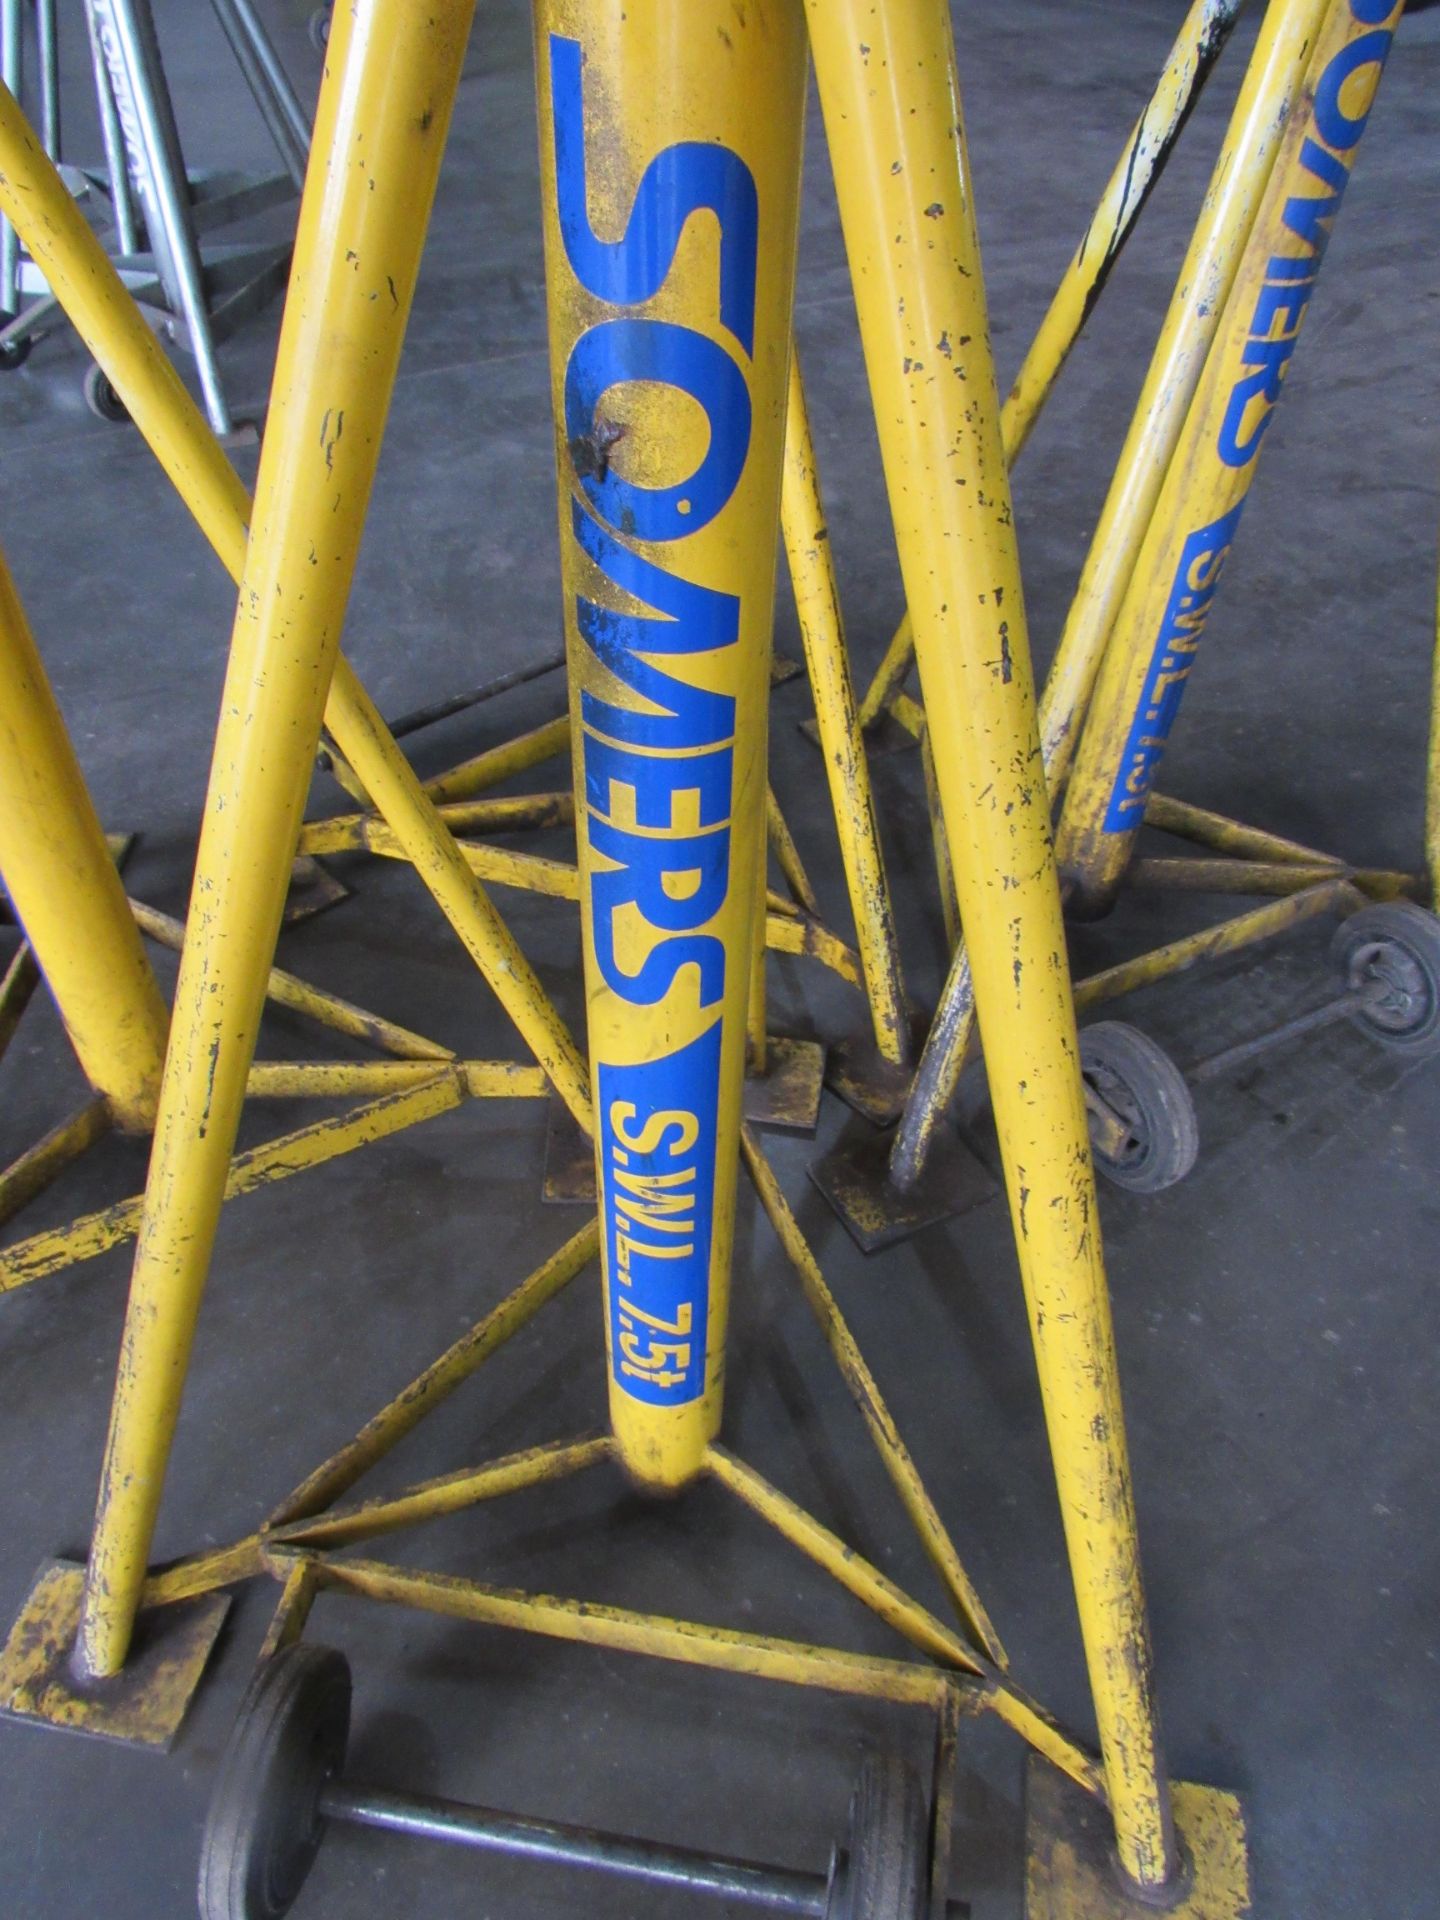 4 Somers 7.5t Vehicle Axle Stands - Image 3 of 3